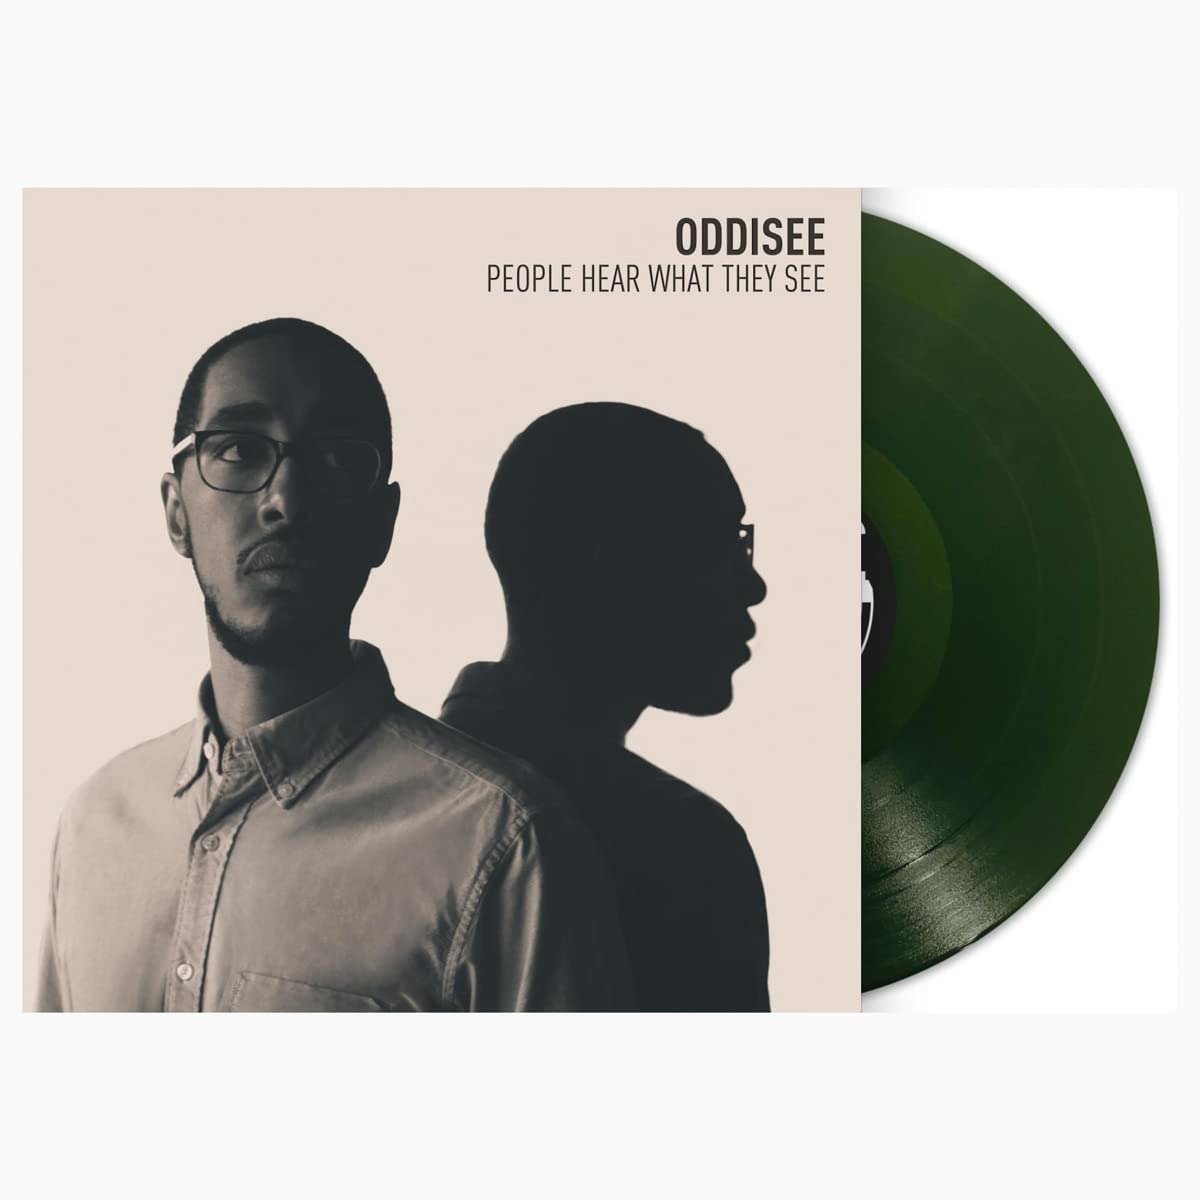 CD Shop - ODDISEE PEOPLE HEAR WHAT THEY SEE